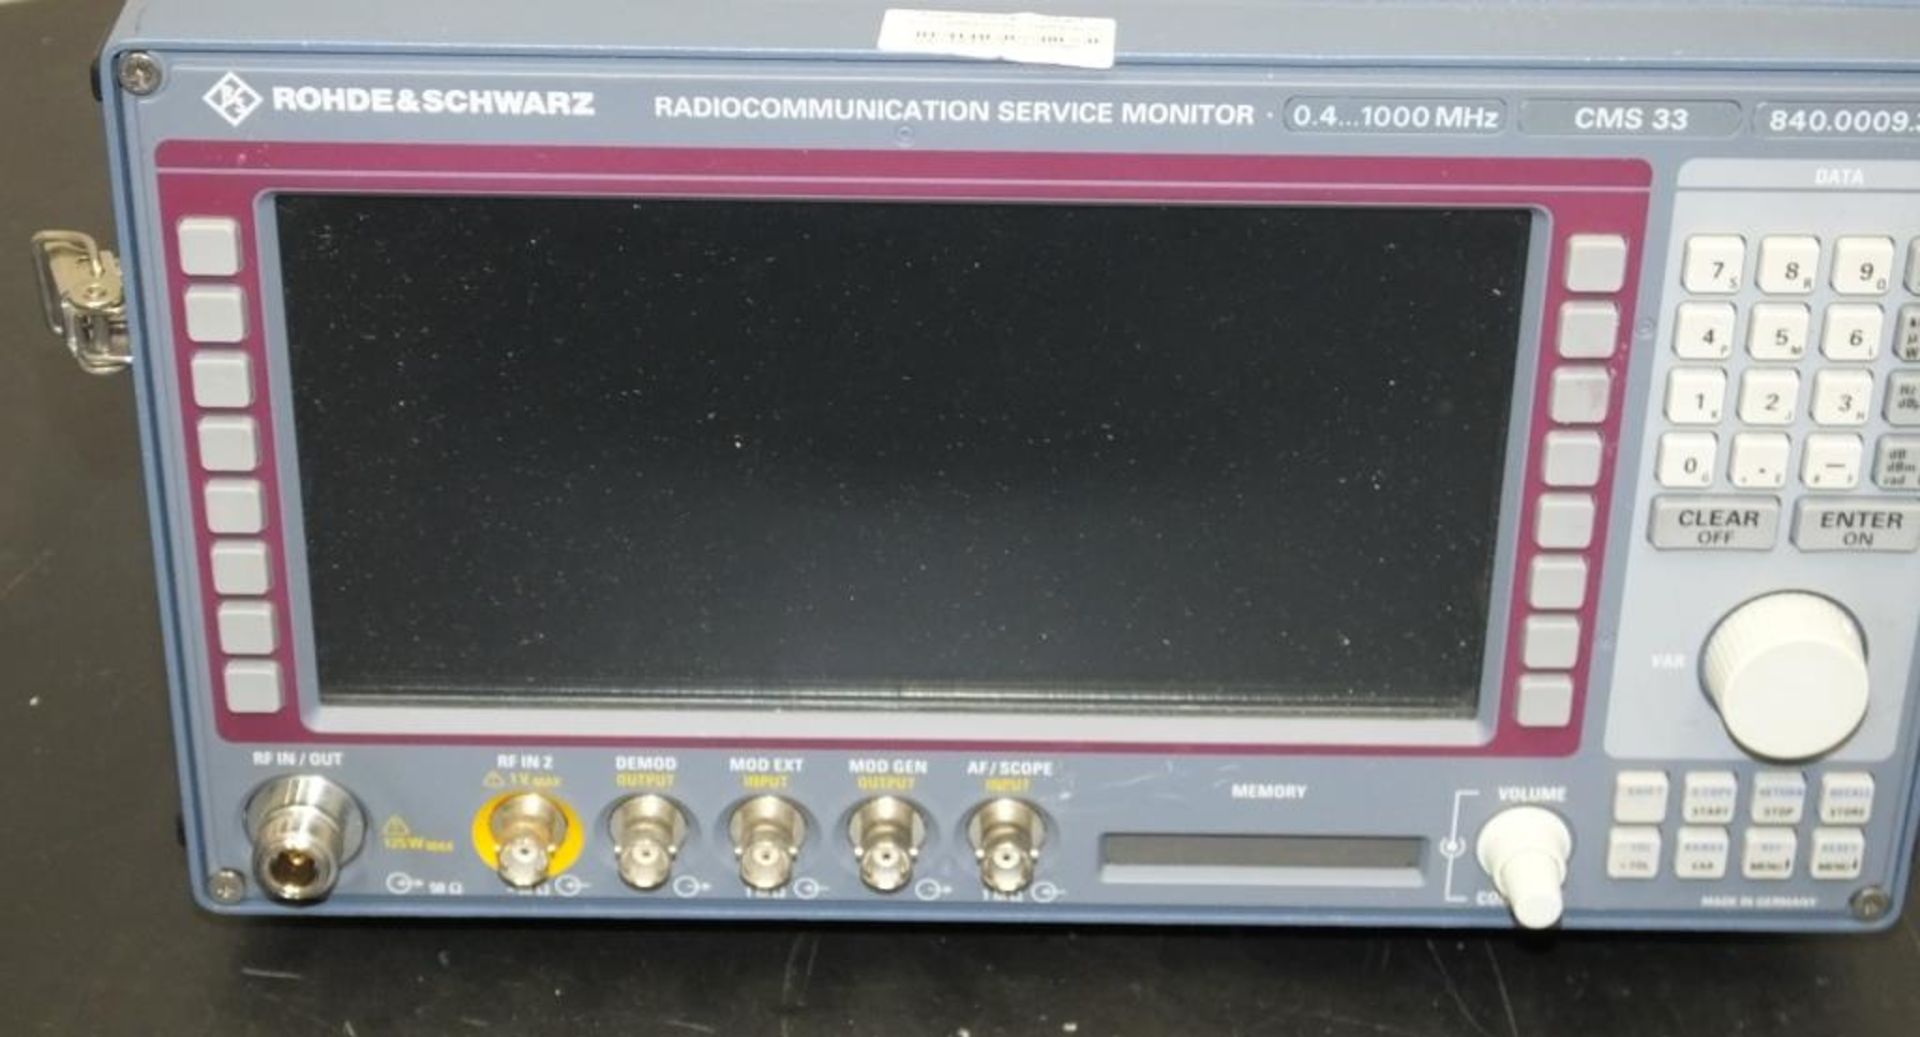 Rohde & Schwarz Radio Communications monitor 0.4 - 1000mhz - CMS33 - 840.0009.34, antenna base in co - Image 5 of 17